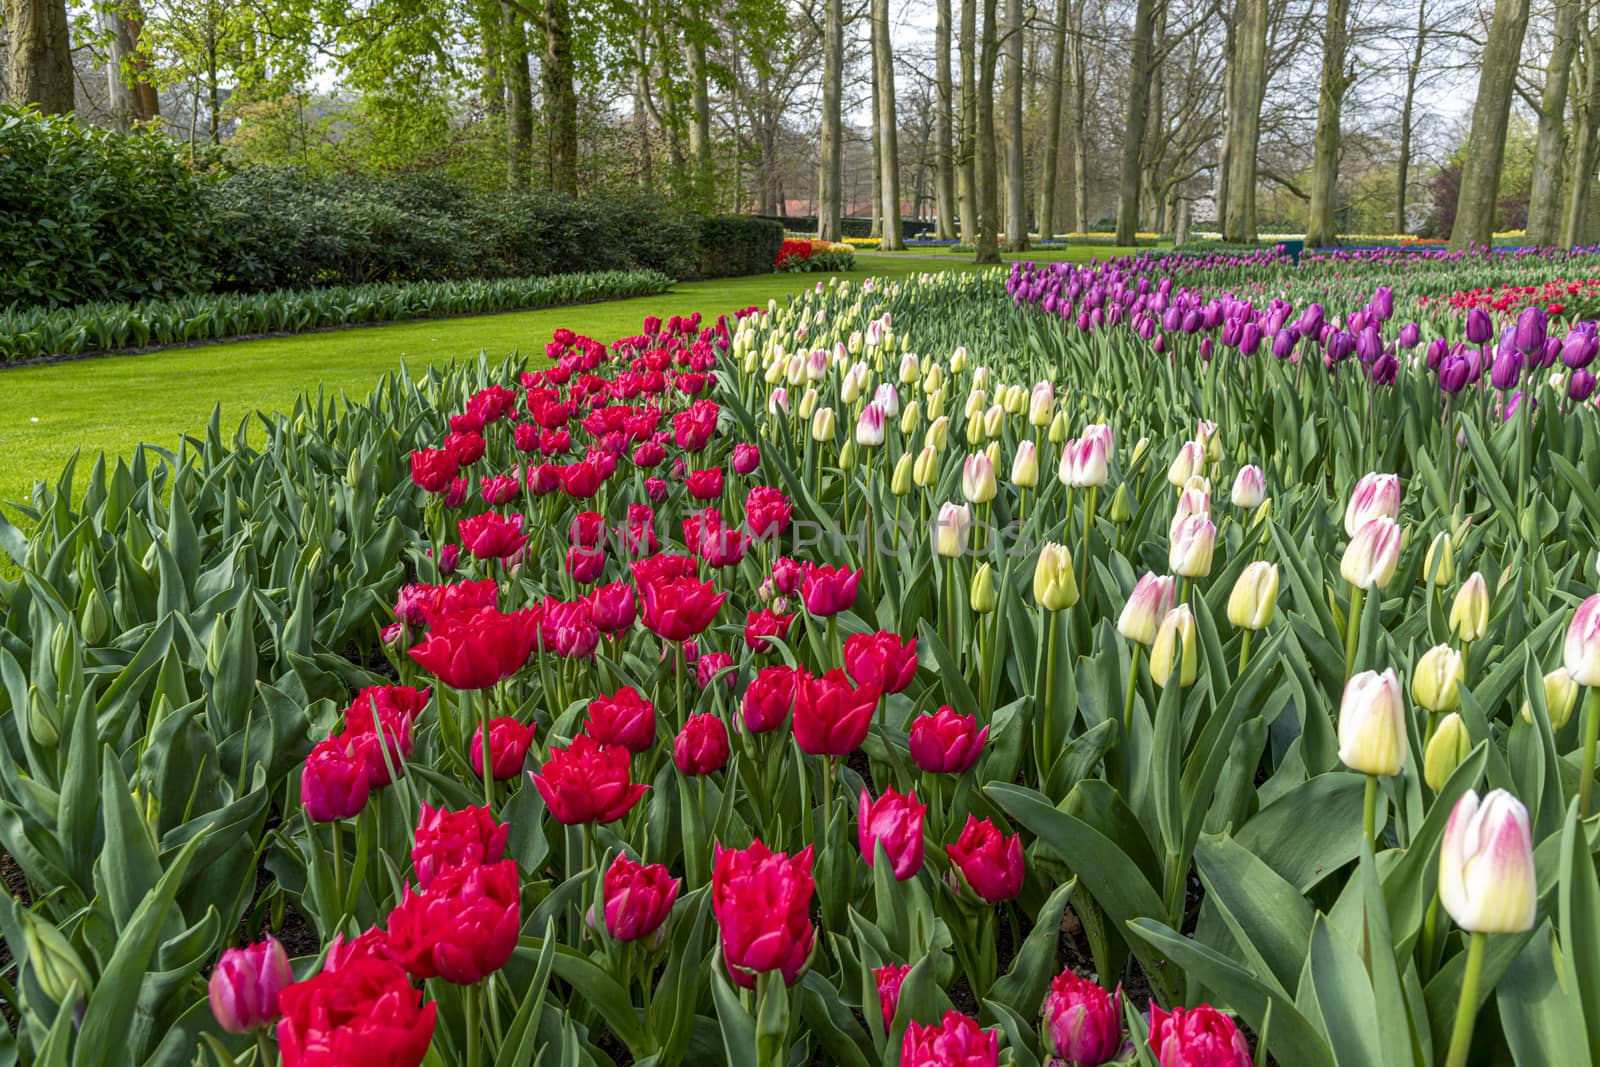 Multi color hyacinth, pure red, pink white color tulips blossom blooming under a very well maintained garden in spring time by ankorlight